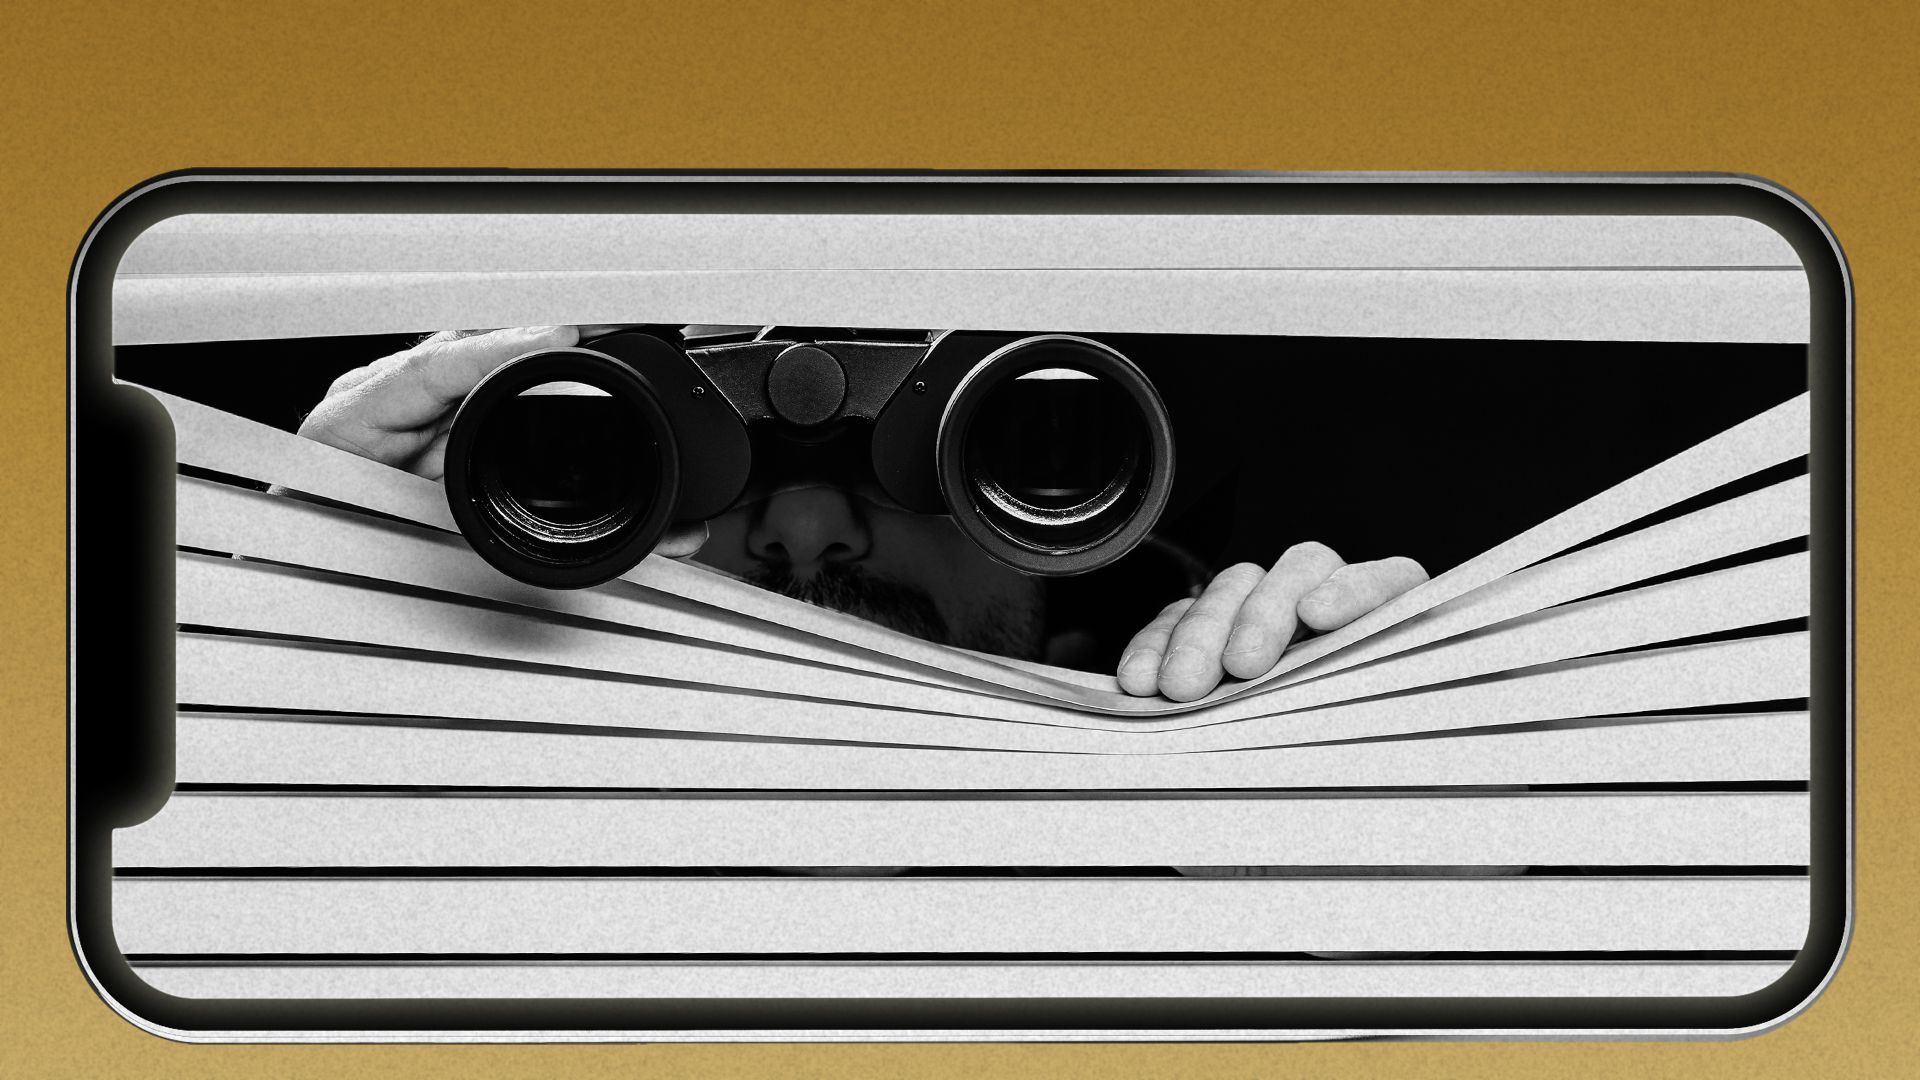 Illustration of a phone screen displaying a person peeking through blinds with binoculars.